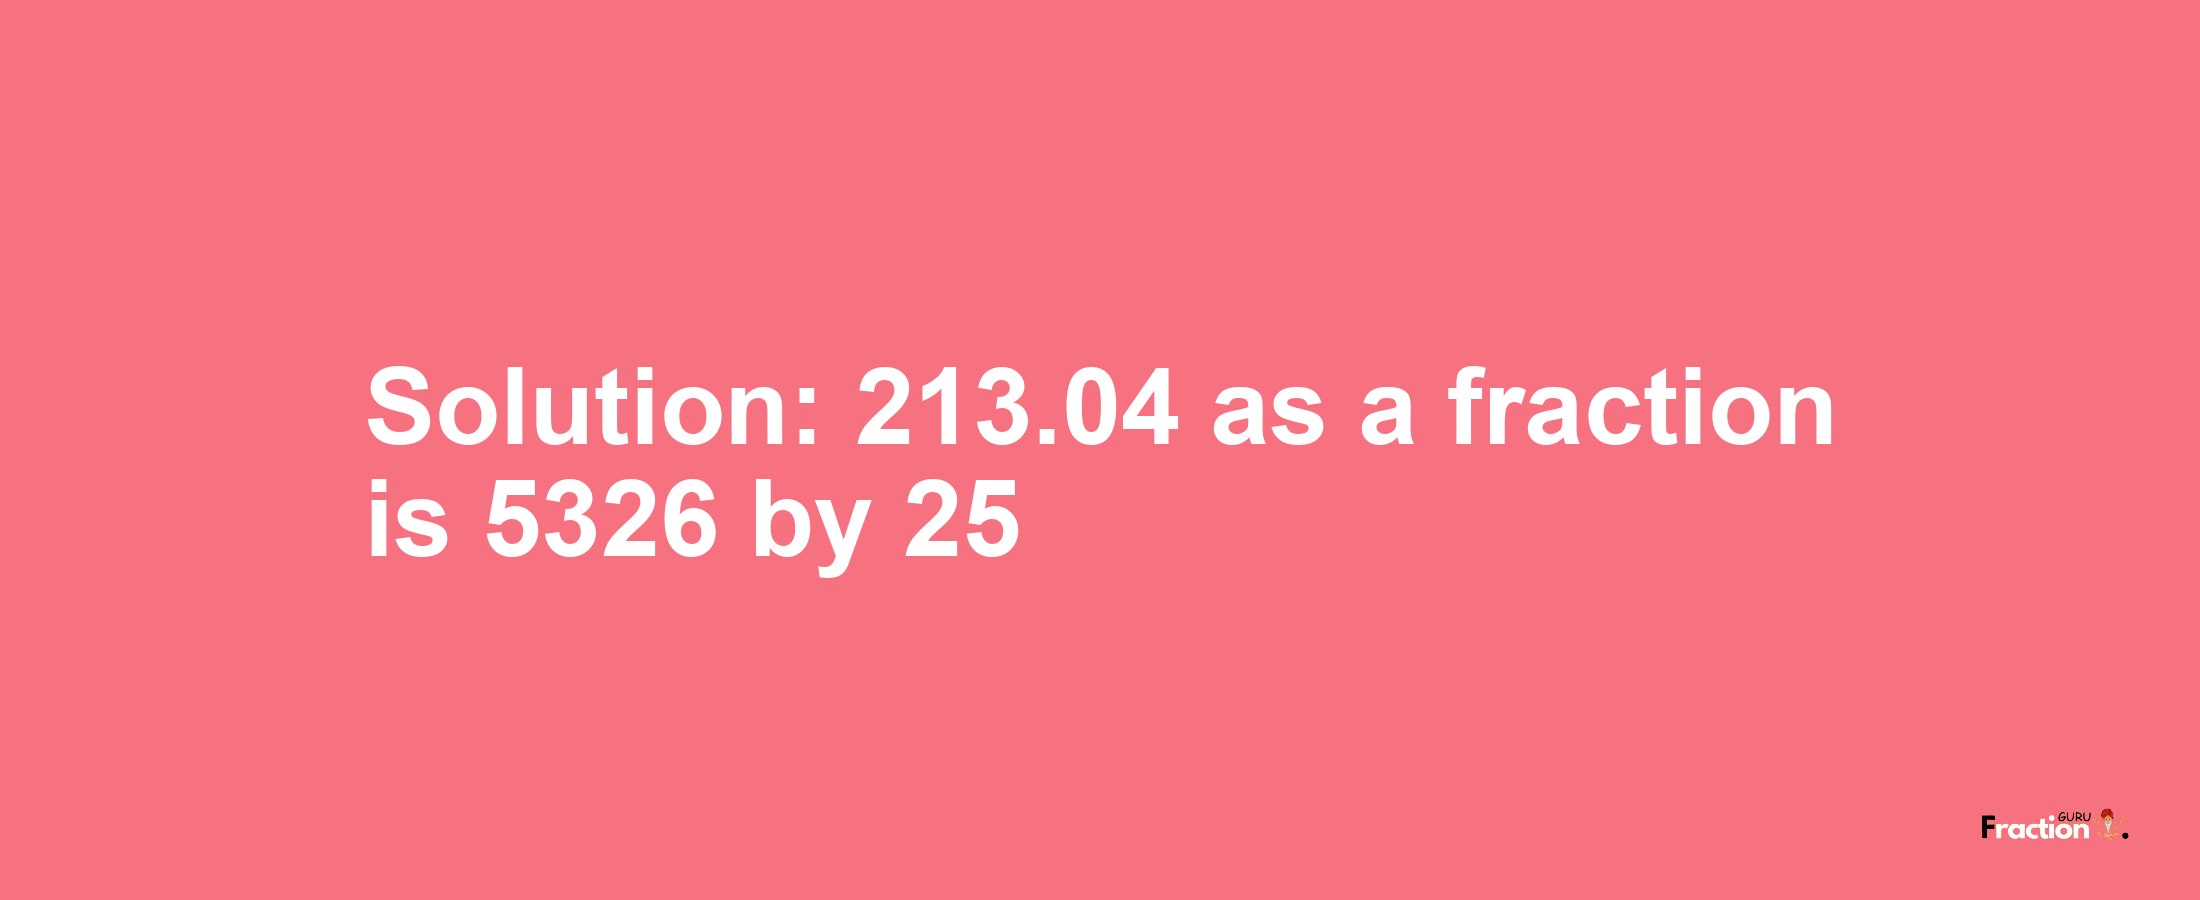 Solution:213.04 as a fraction is 5326/25